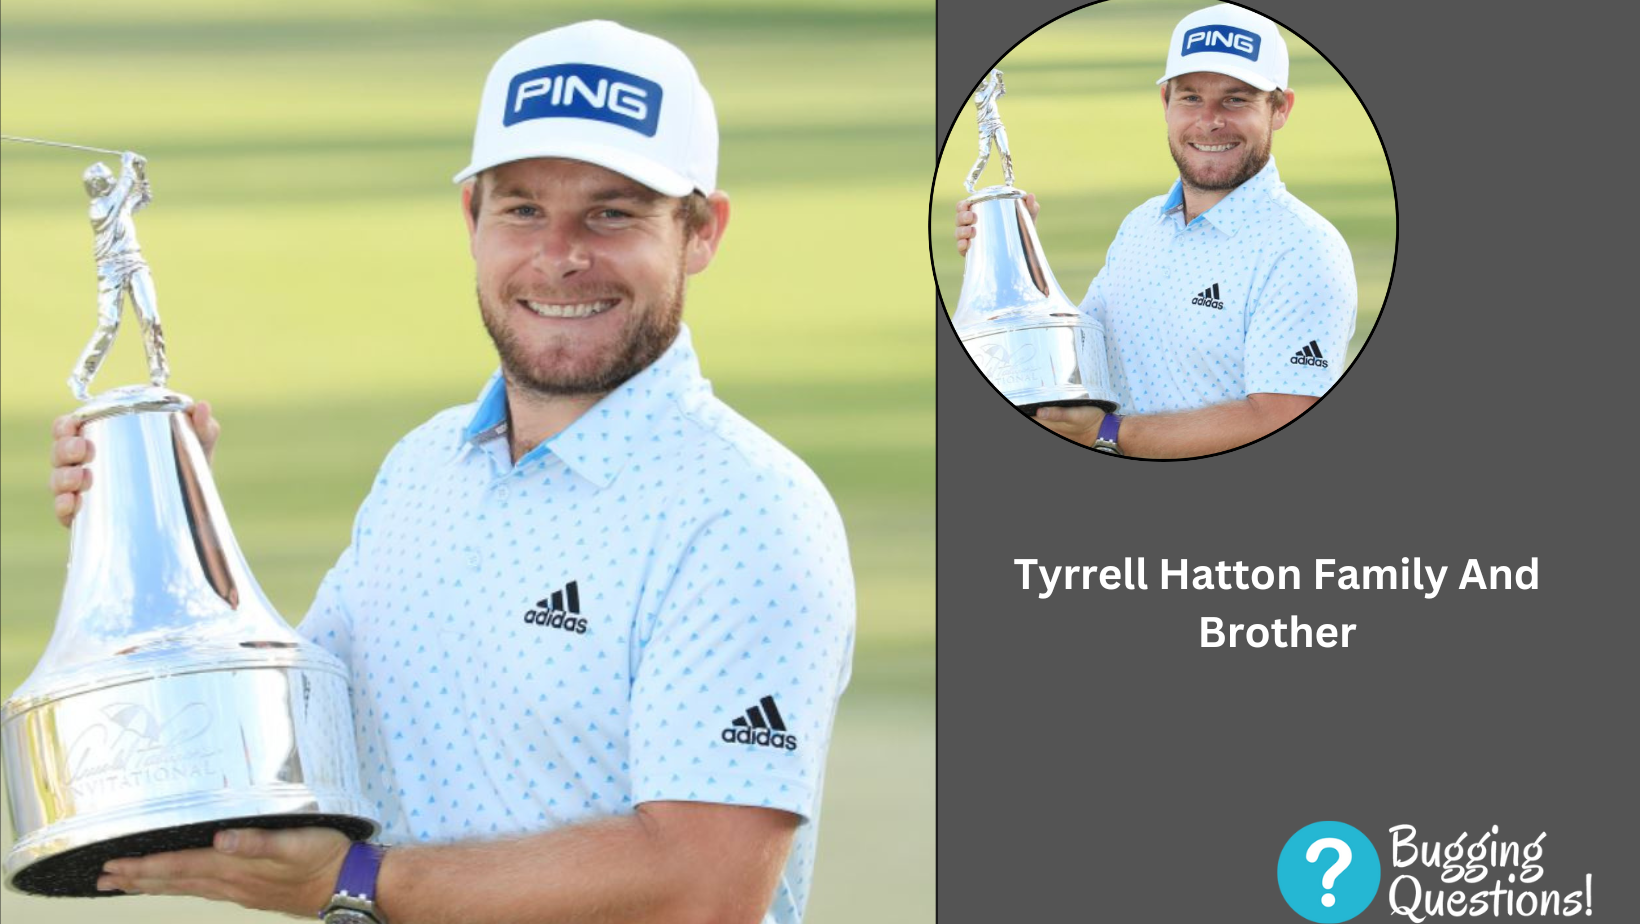 Tyrrell Hatton Family And Brother